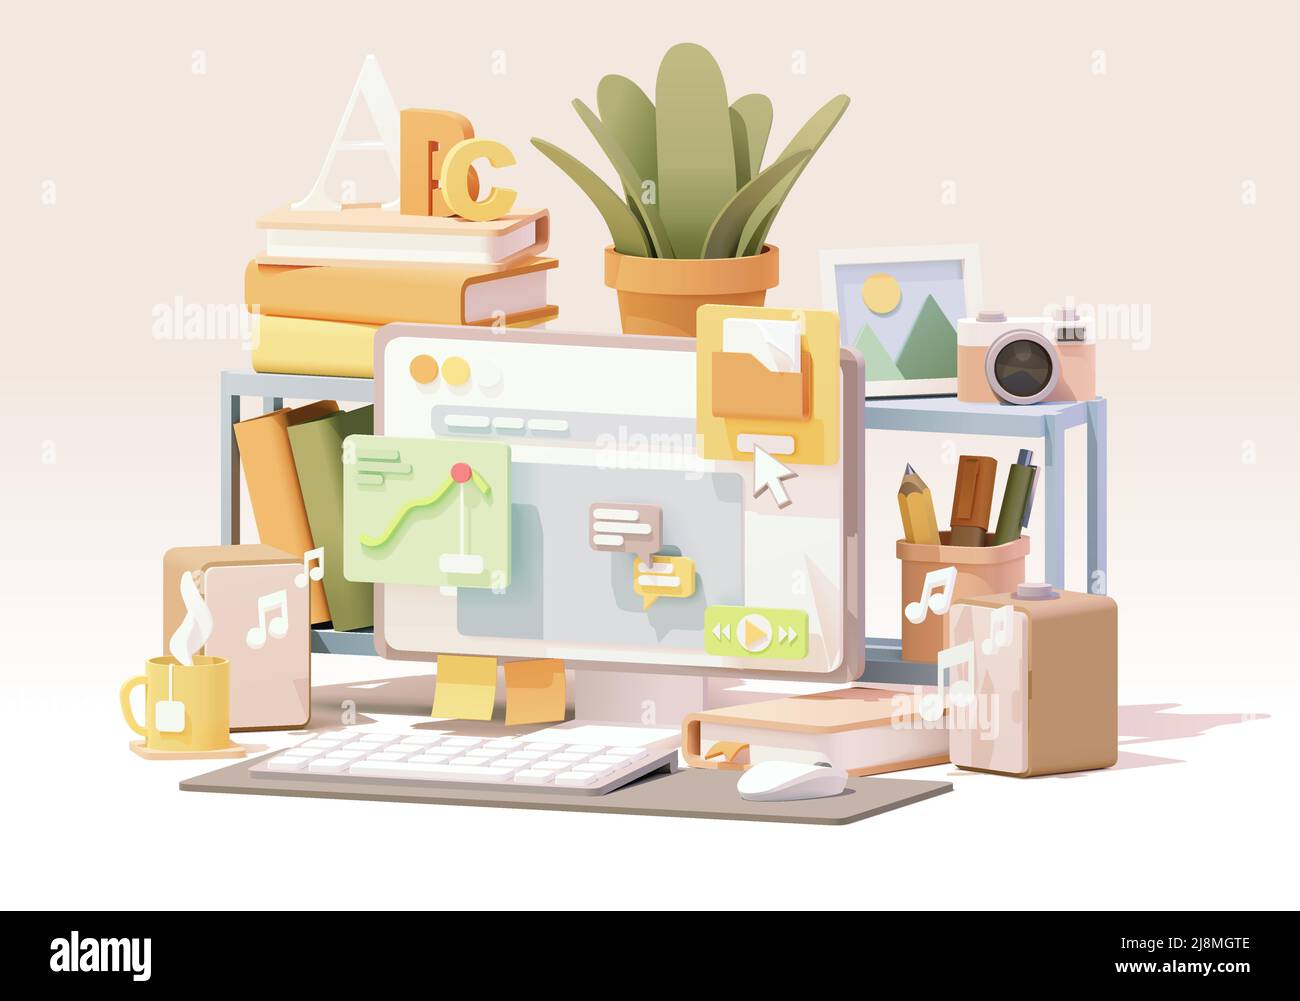 Vector abstract office workplace. Desktop PC, books and stationery on the shelf, applications on screen, cup of tea. Cozy home office illustration Stock Vector